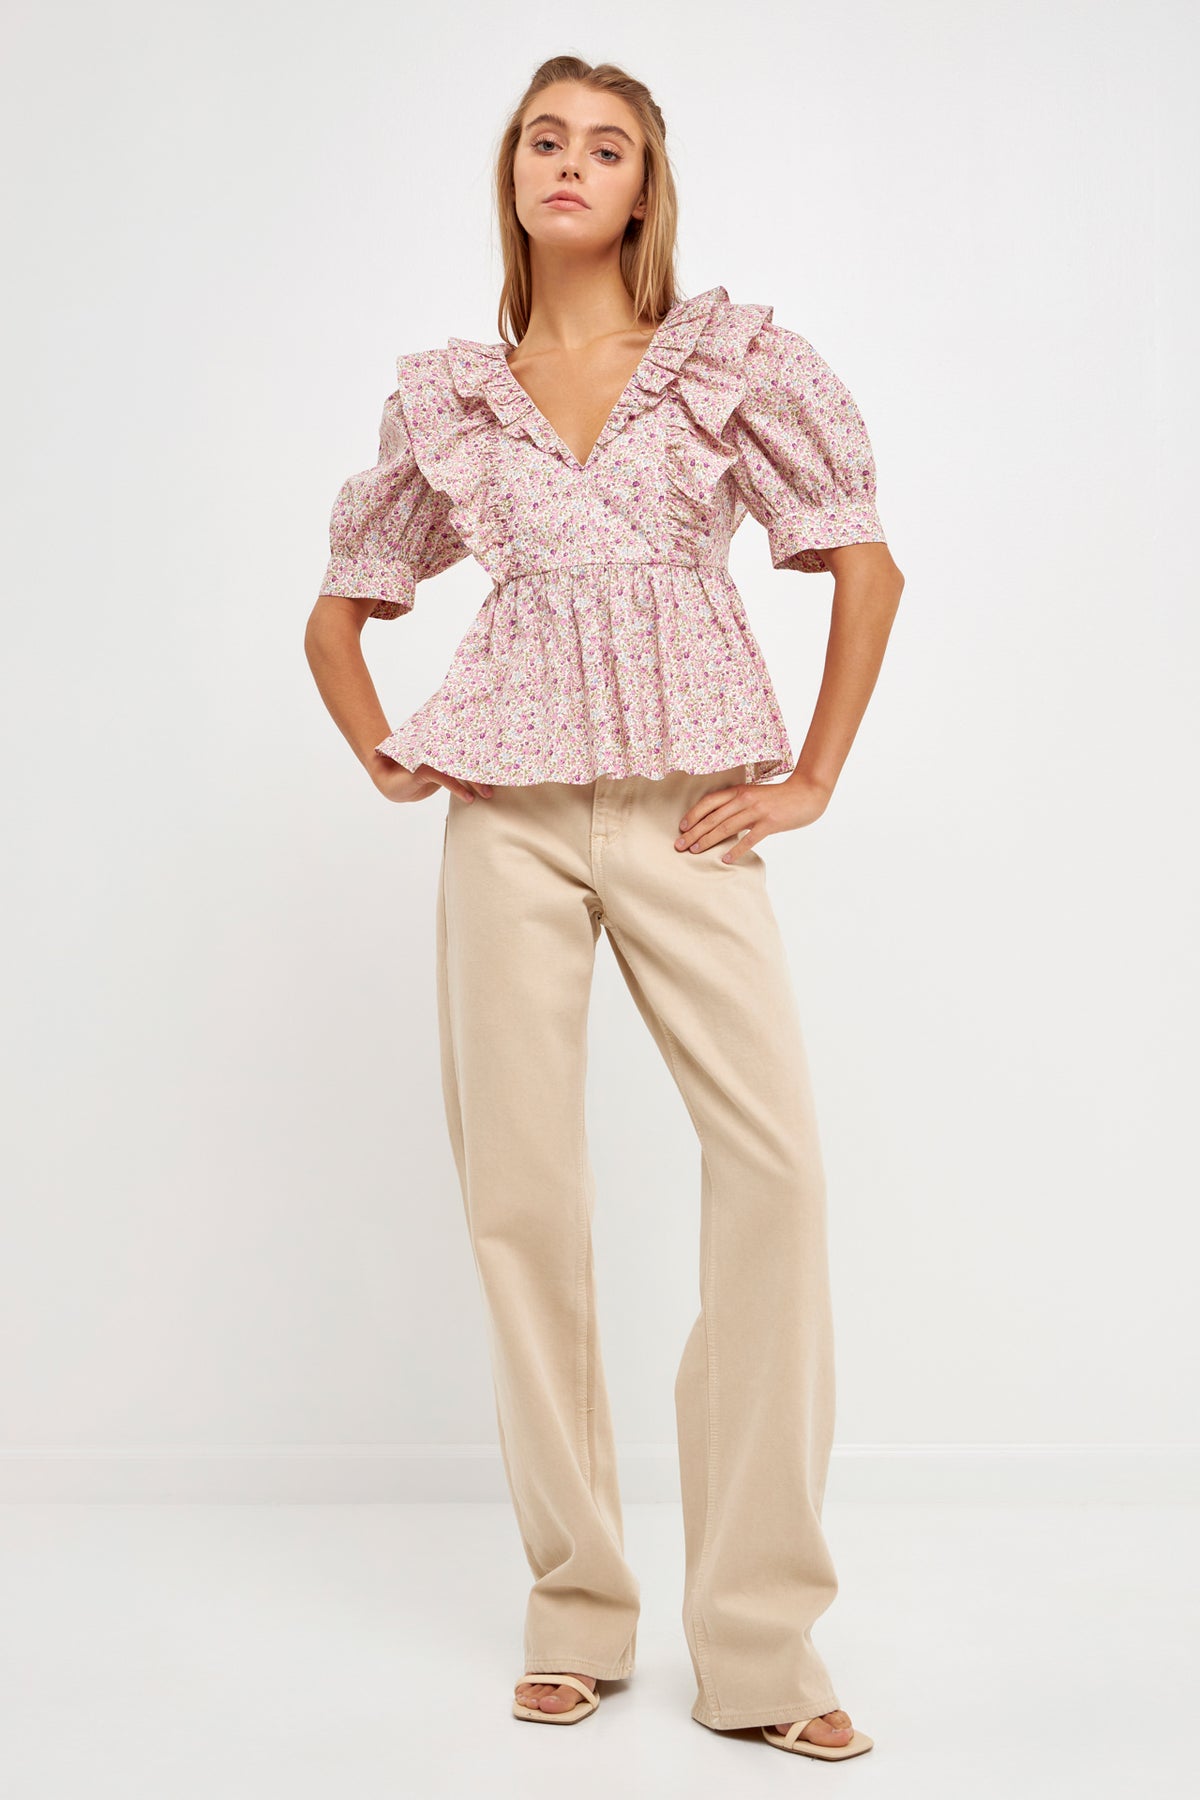 ENGLISH FACTORY - Cotton Floral Ruffled Top - TOPS available at Objectrare